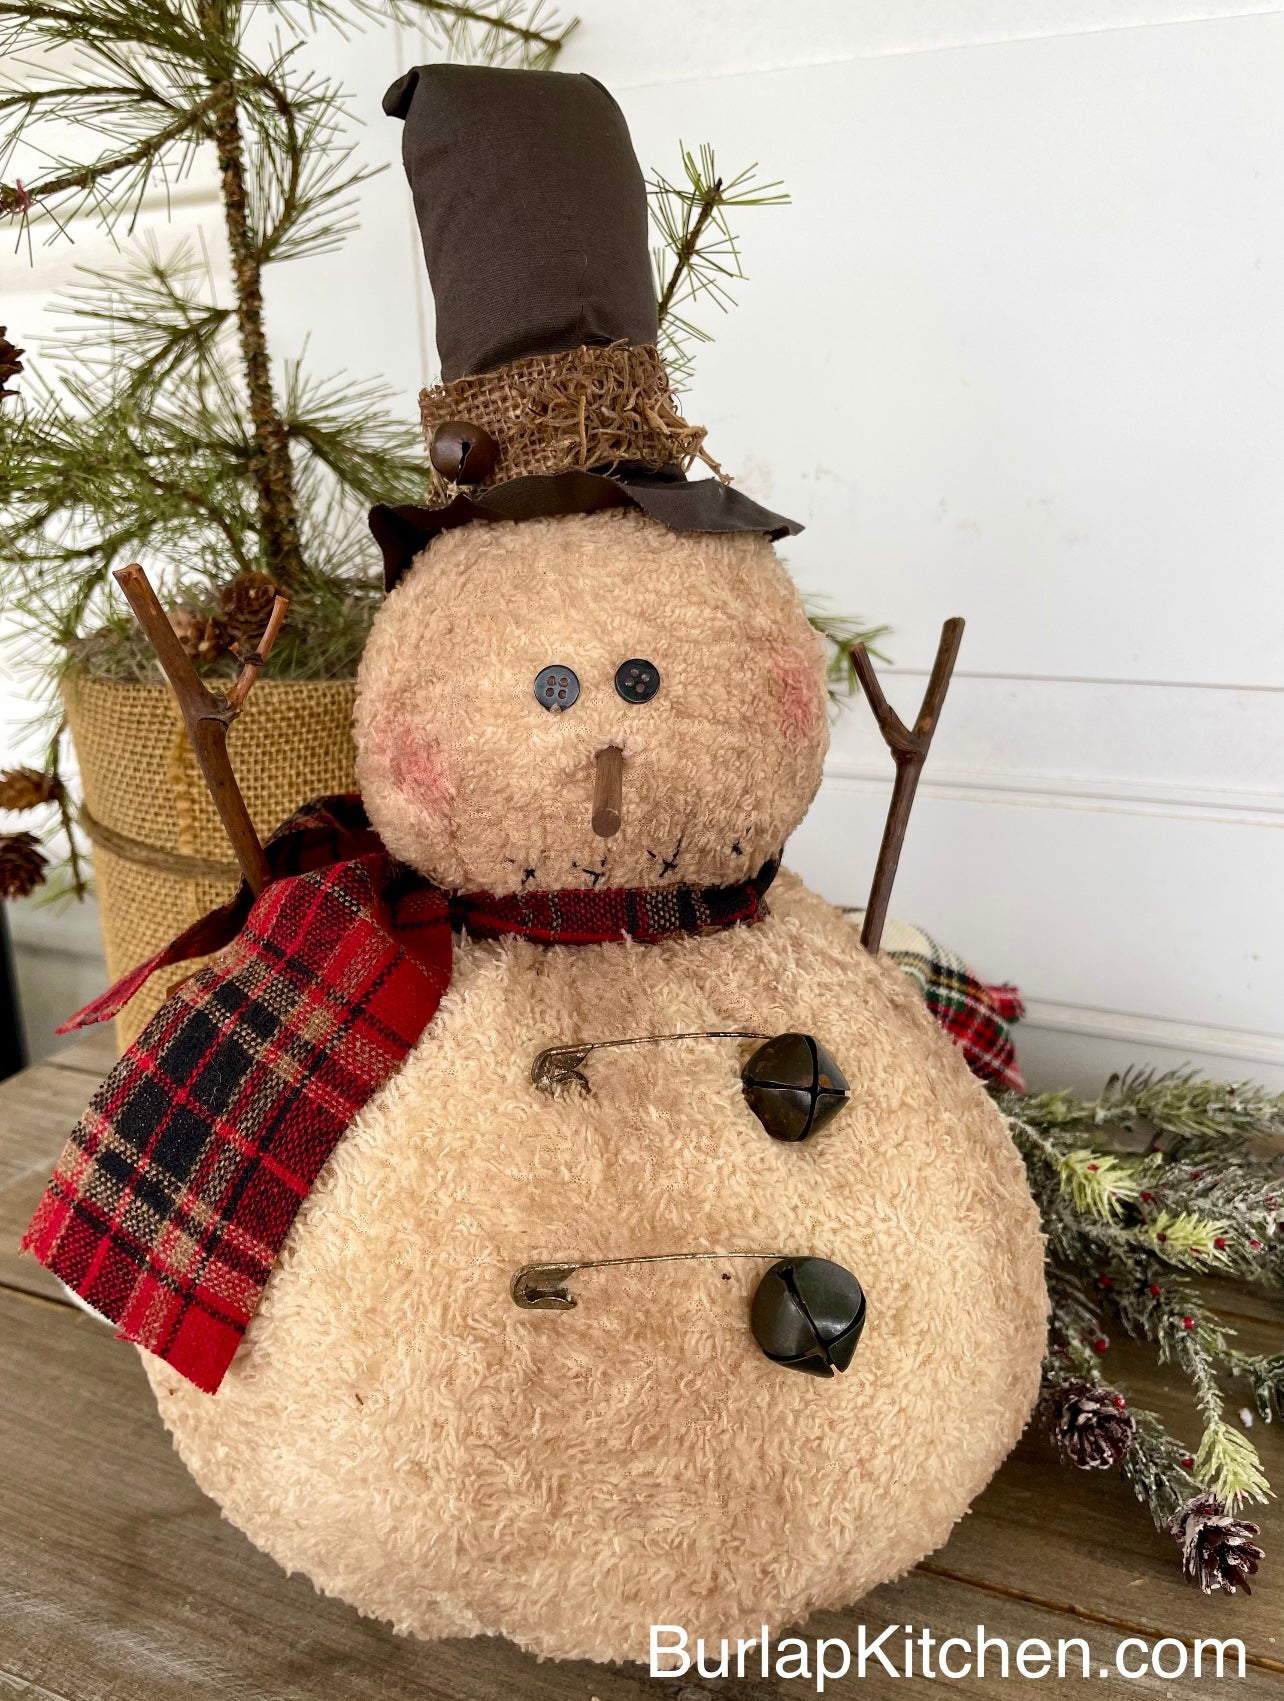 Henry the Snowman - Primitive, FREE SHIPPING